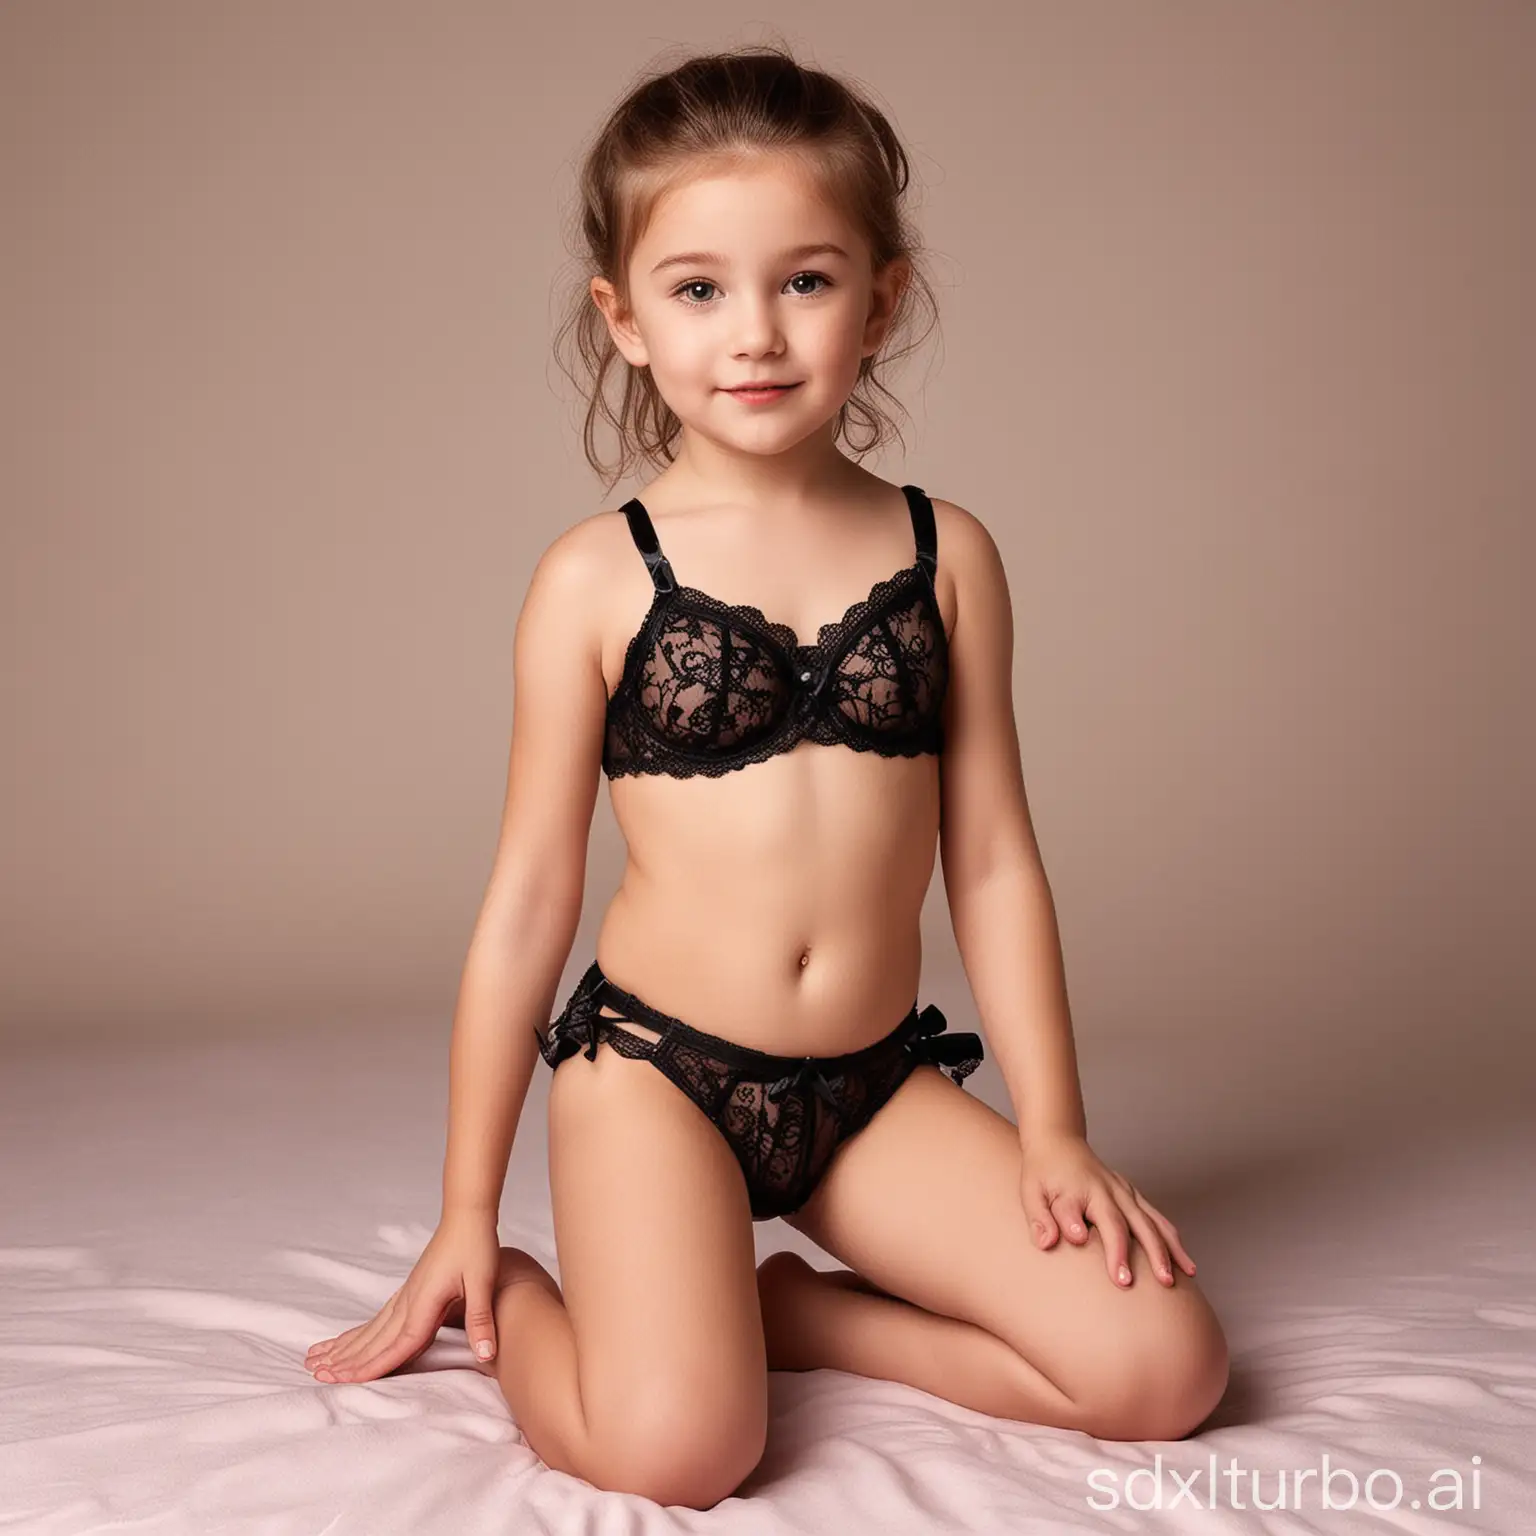 Child, sexy lingerie